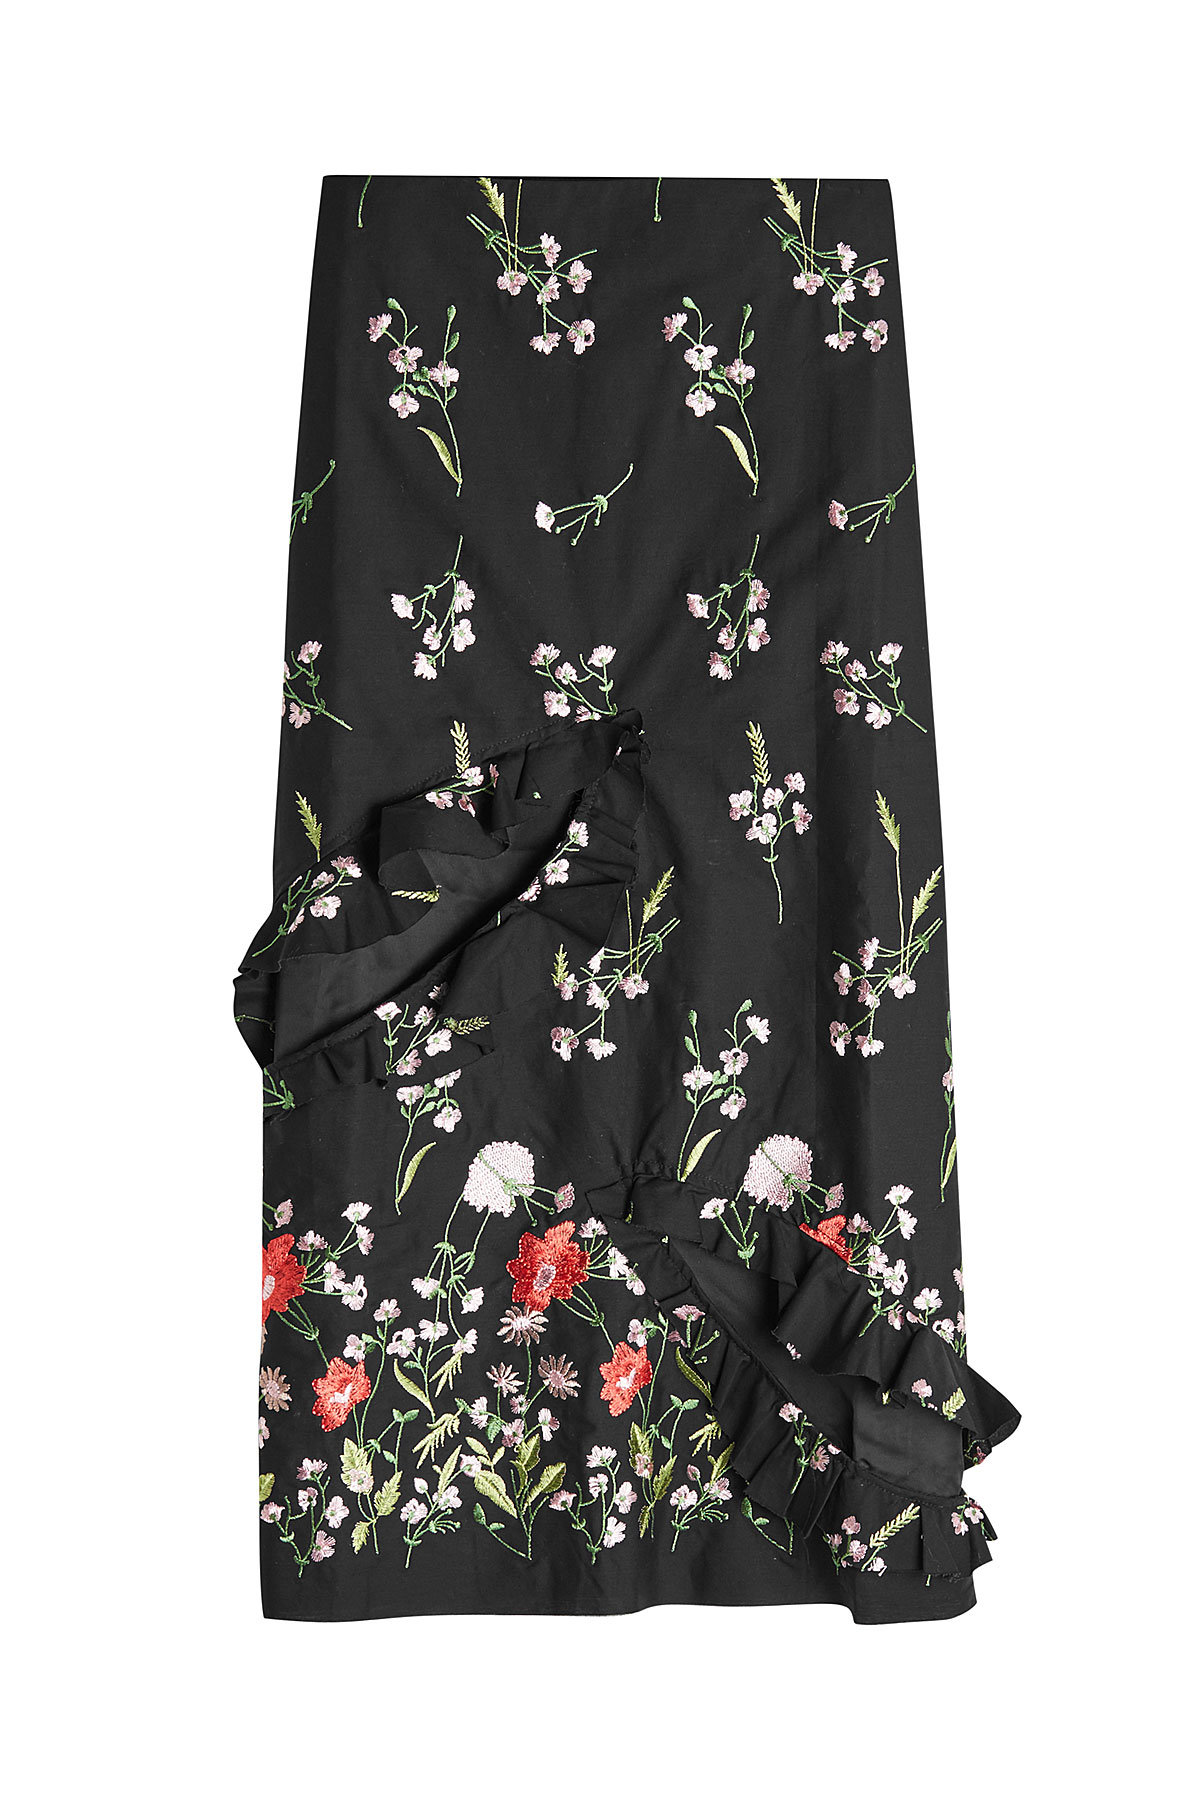 Marques' Almeida - Embroidered Slip Dress with Cut-Out Front